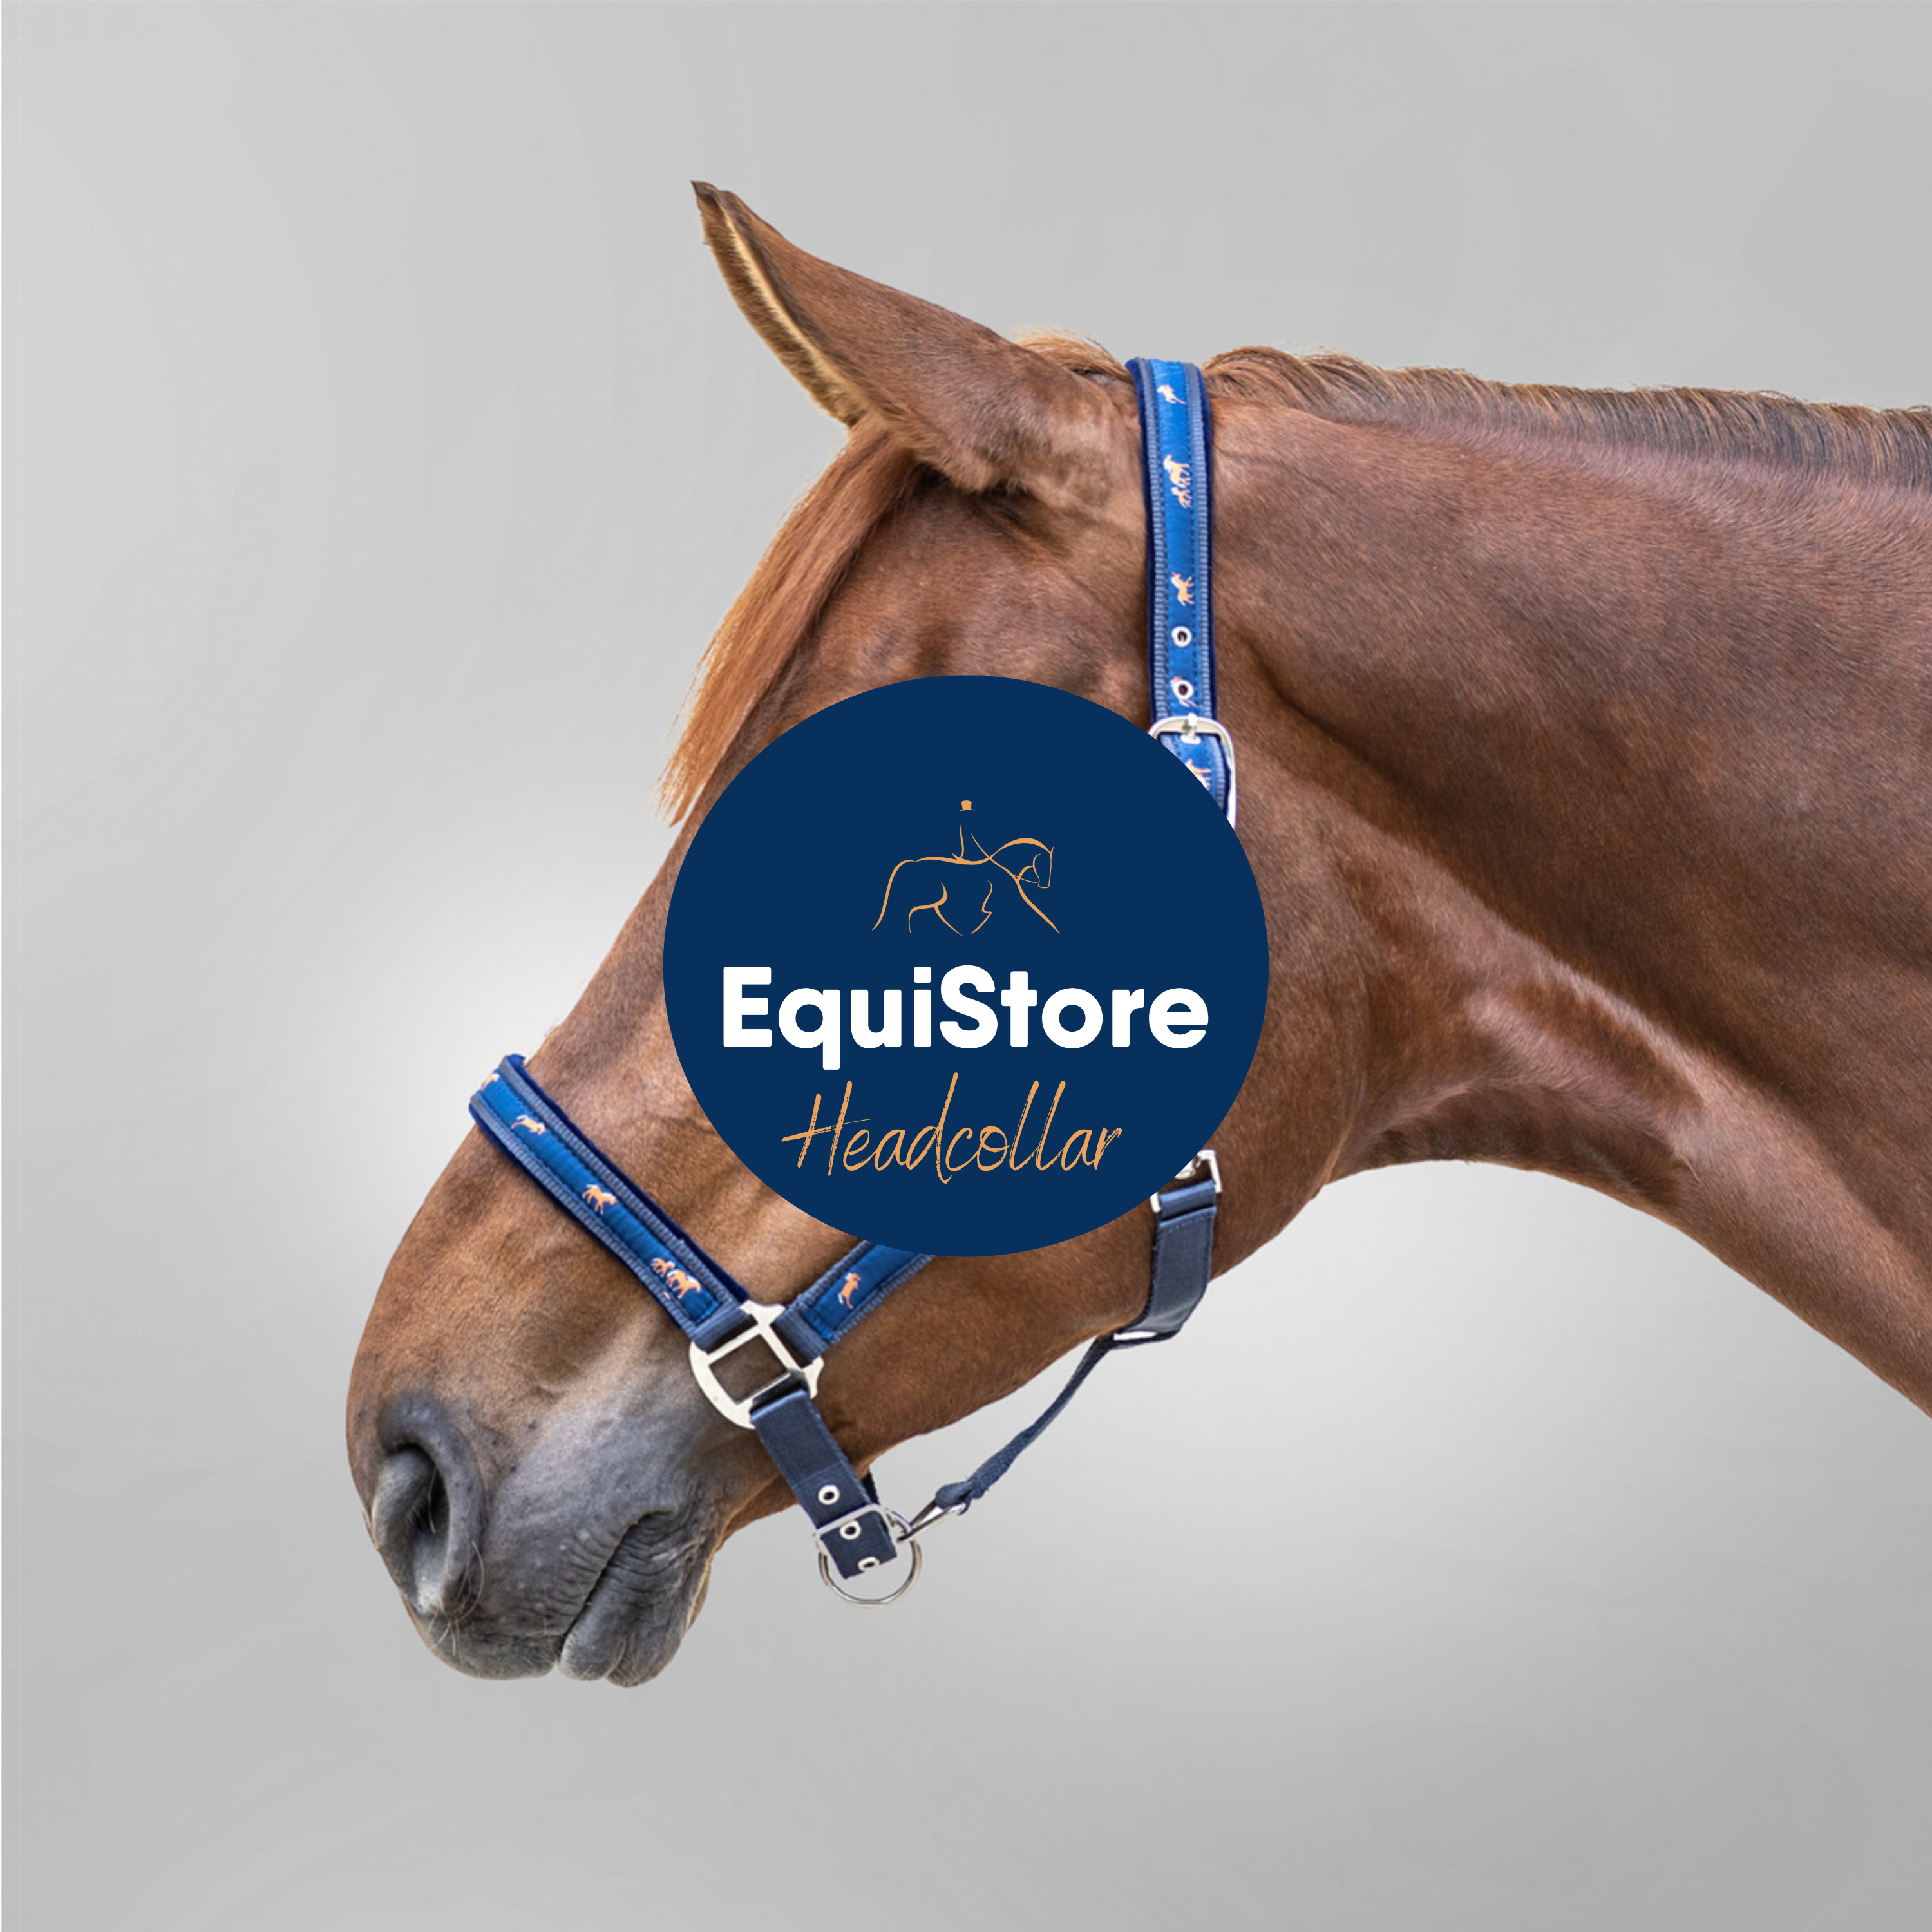 A selection of good quality headcollars and lead ropes for horses and ponies, available in Ireland at Equistore. 